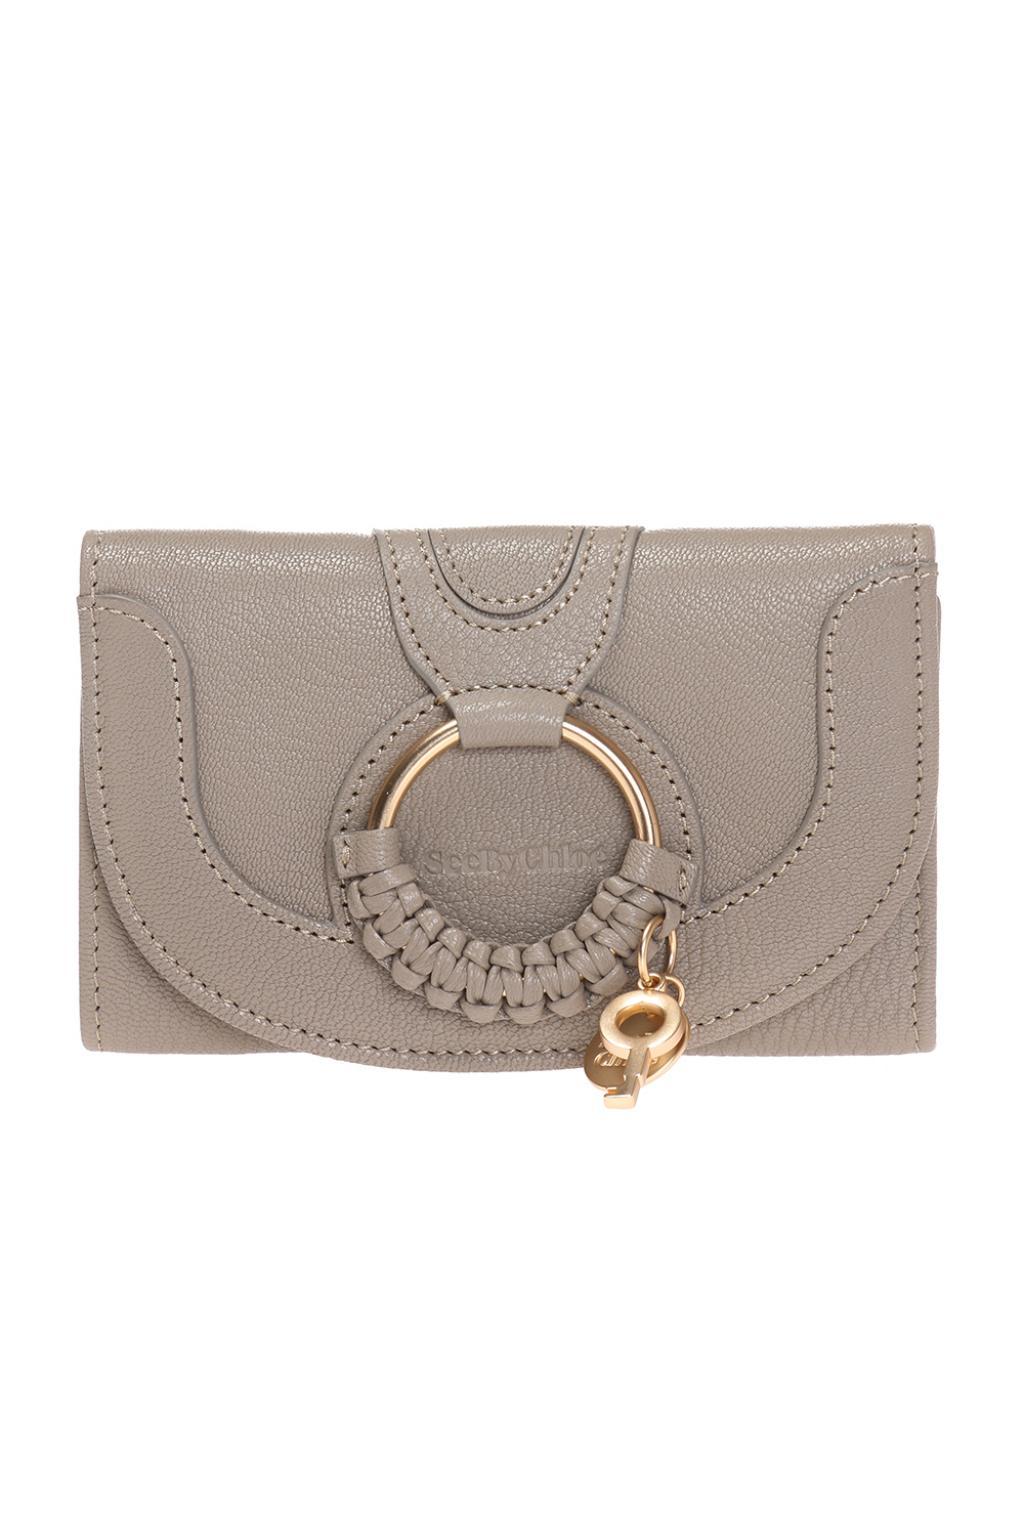 See By Chloé Cotton Embellished Branded Wallet in Grey (Gray) - Lyst